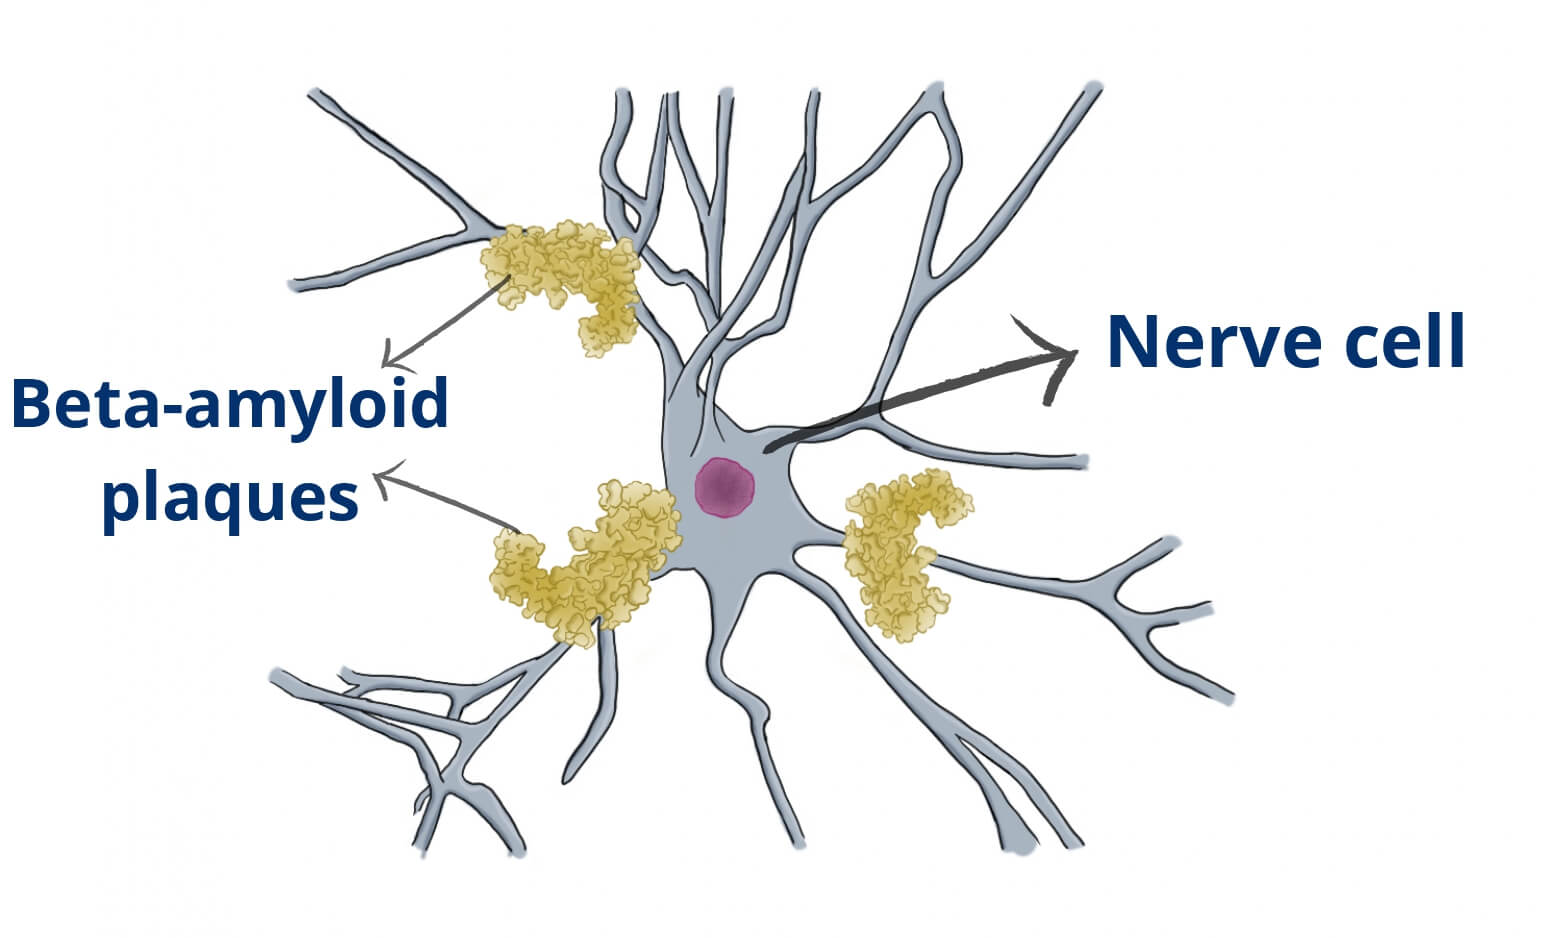 Beta-amyloid plaques on a nerve cell, typical of Alzheimer's Disease